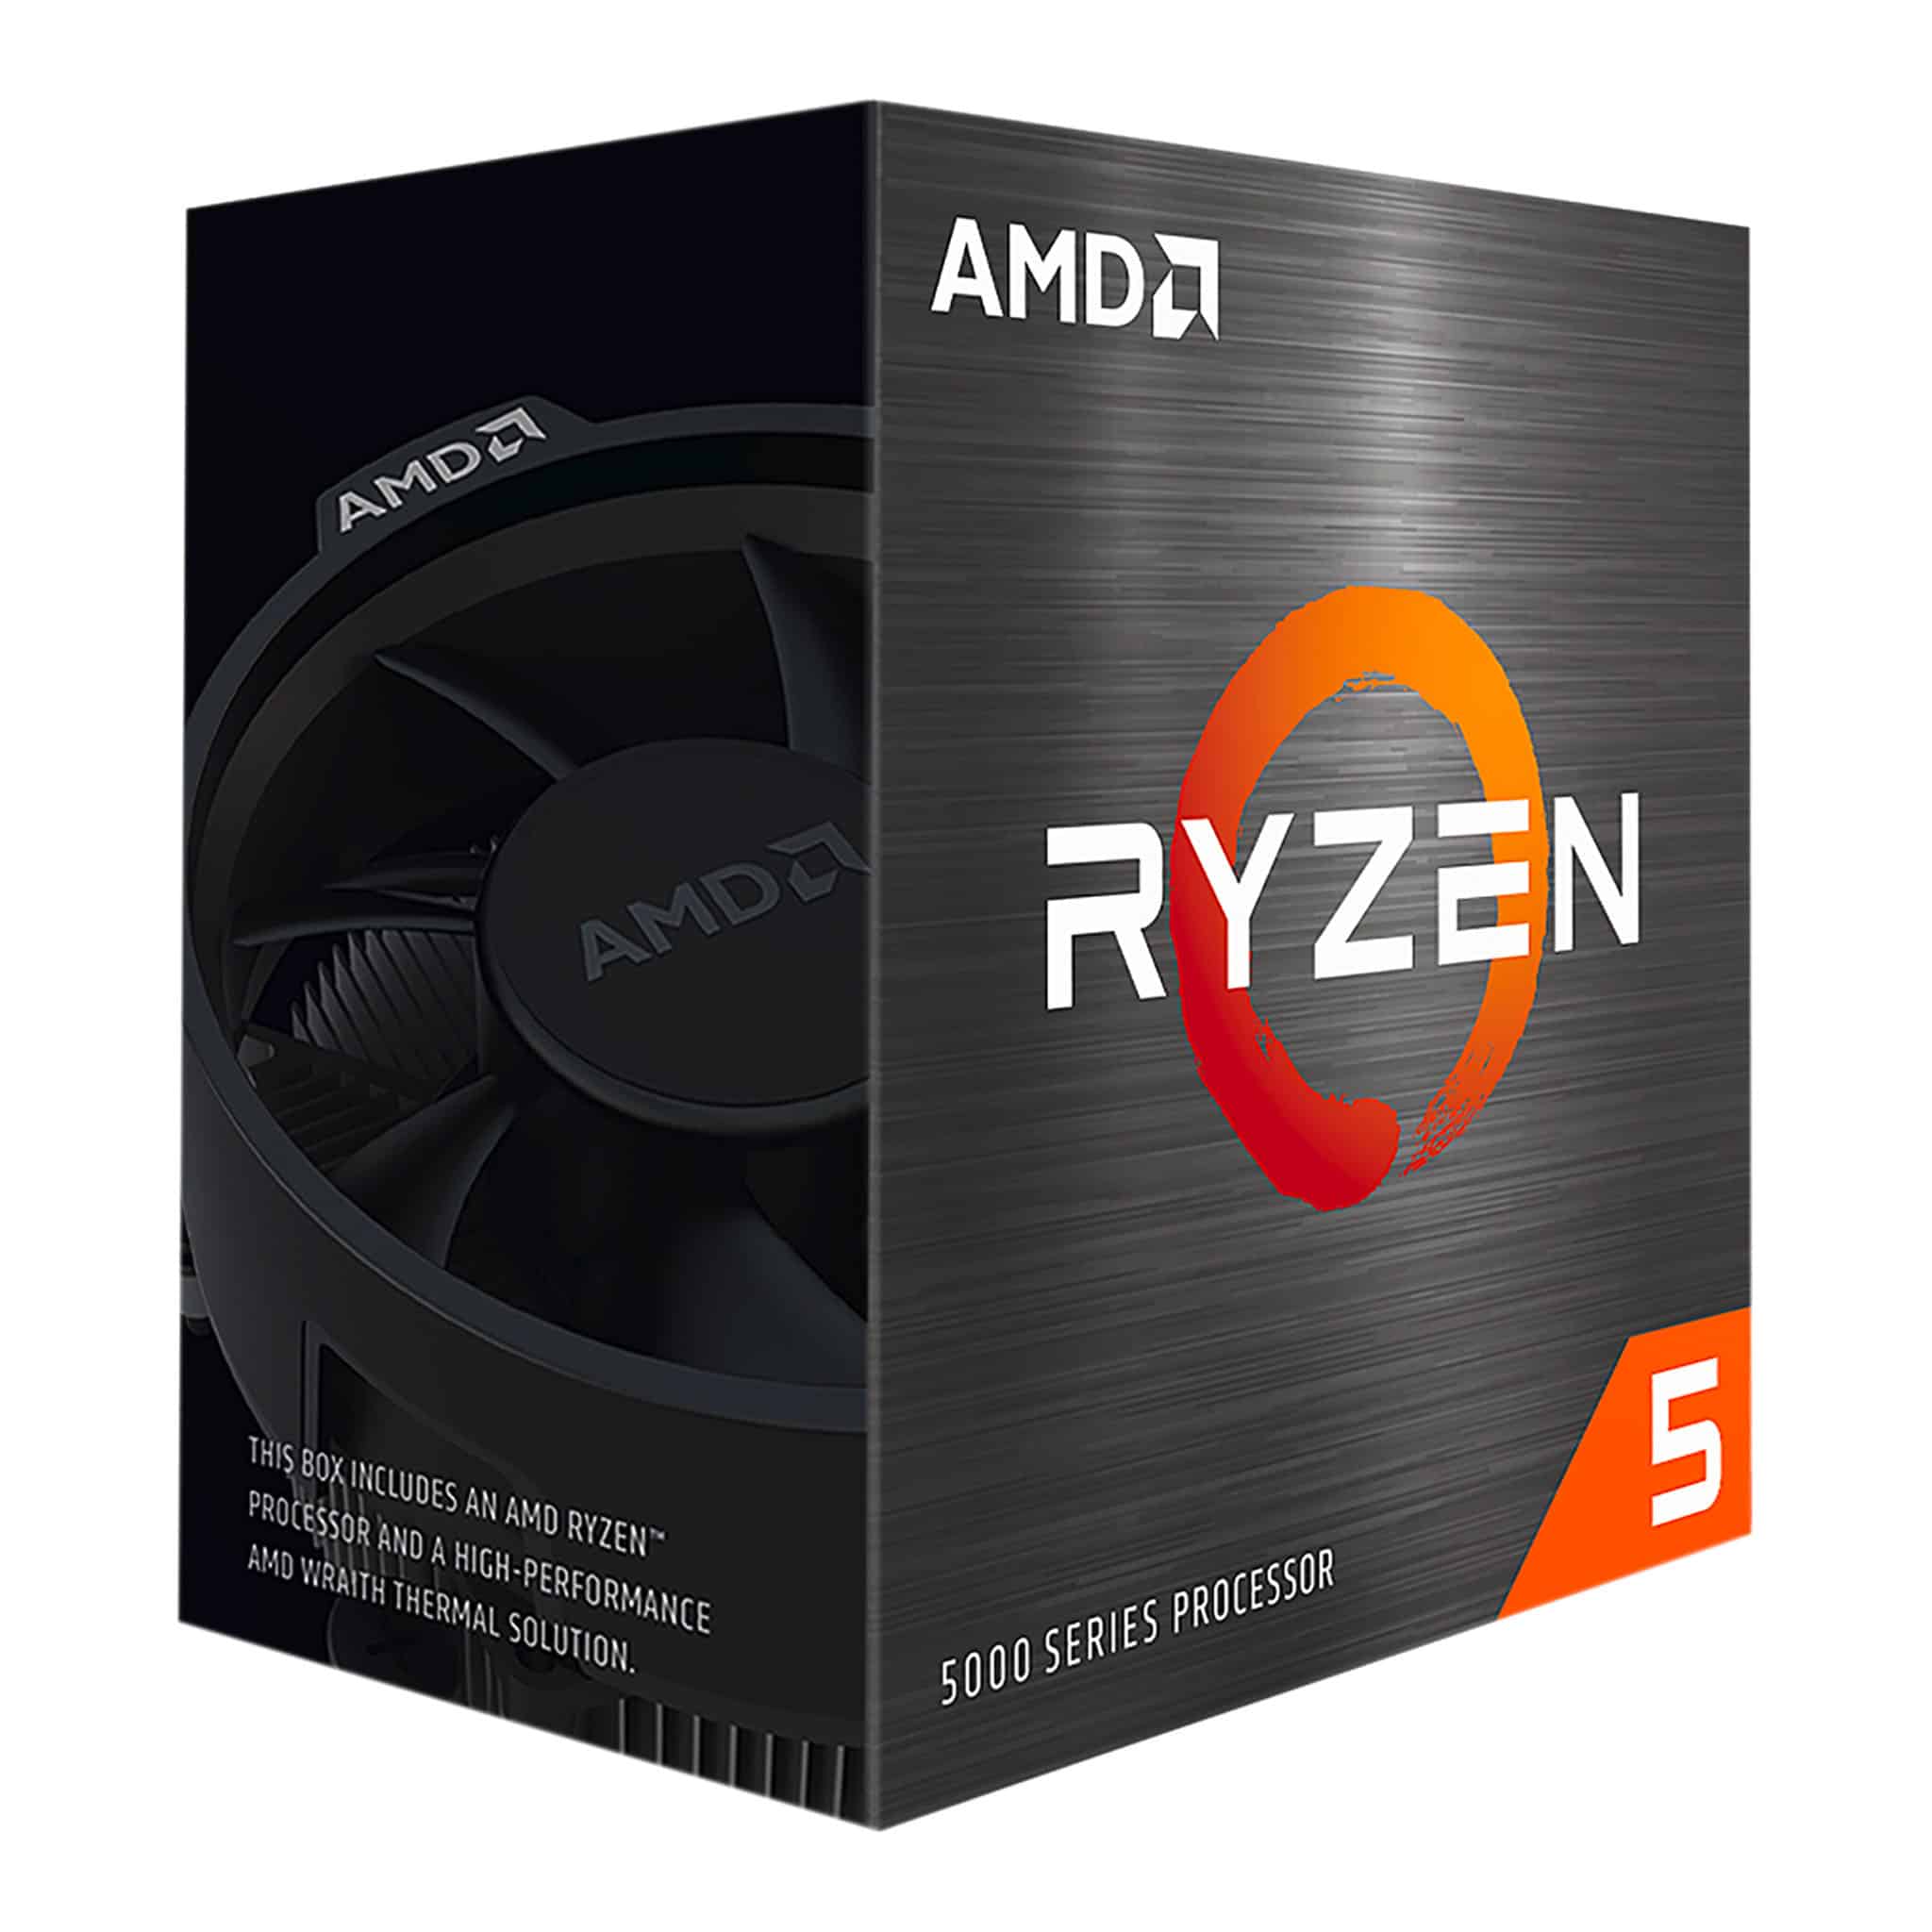 AMD Ryzen 5 5600X 6 Core AM4 3.70 GHz Unlocked CPU Processor (4.6 GHz Max Boost) With Wraith Stealth